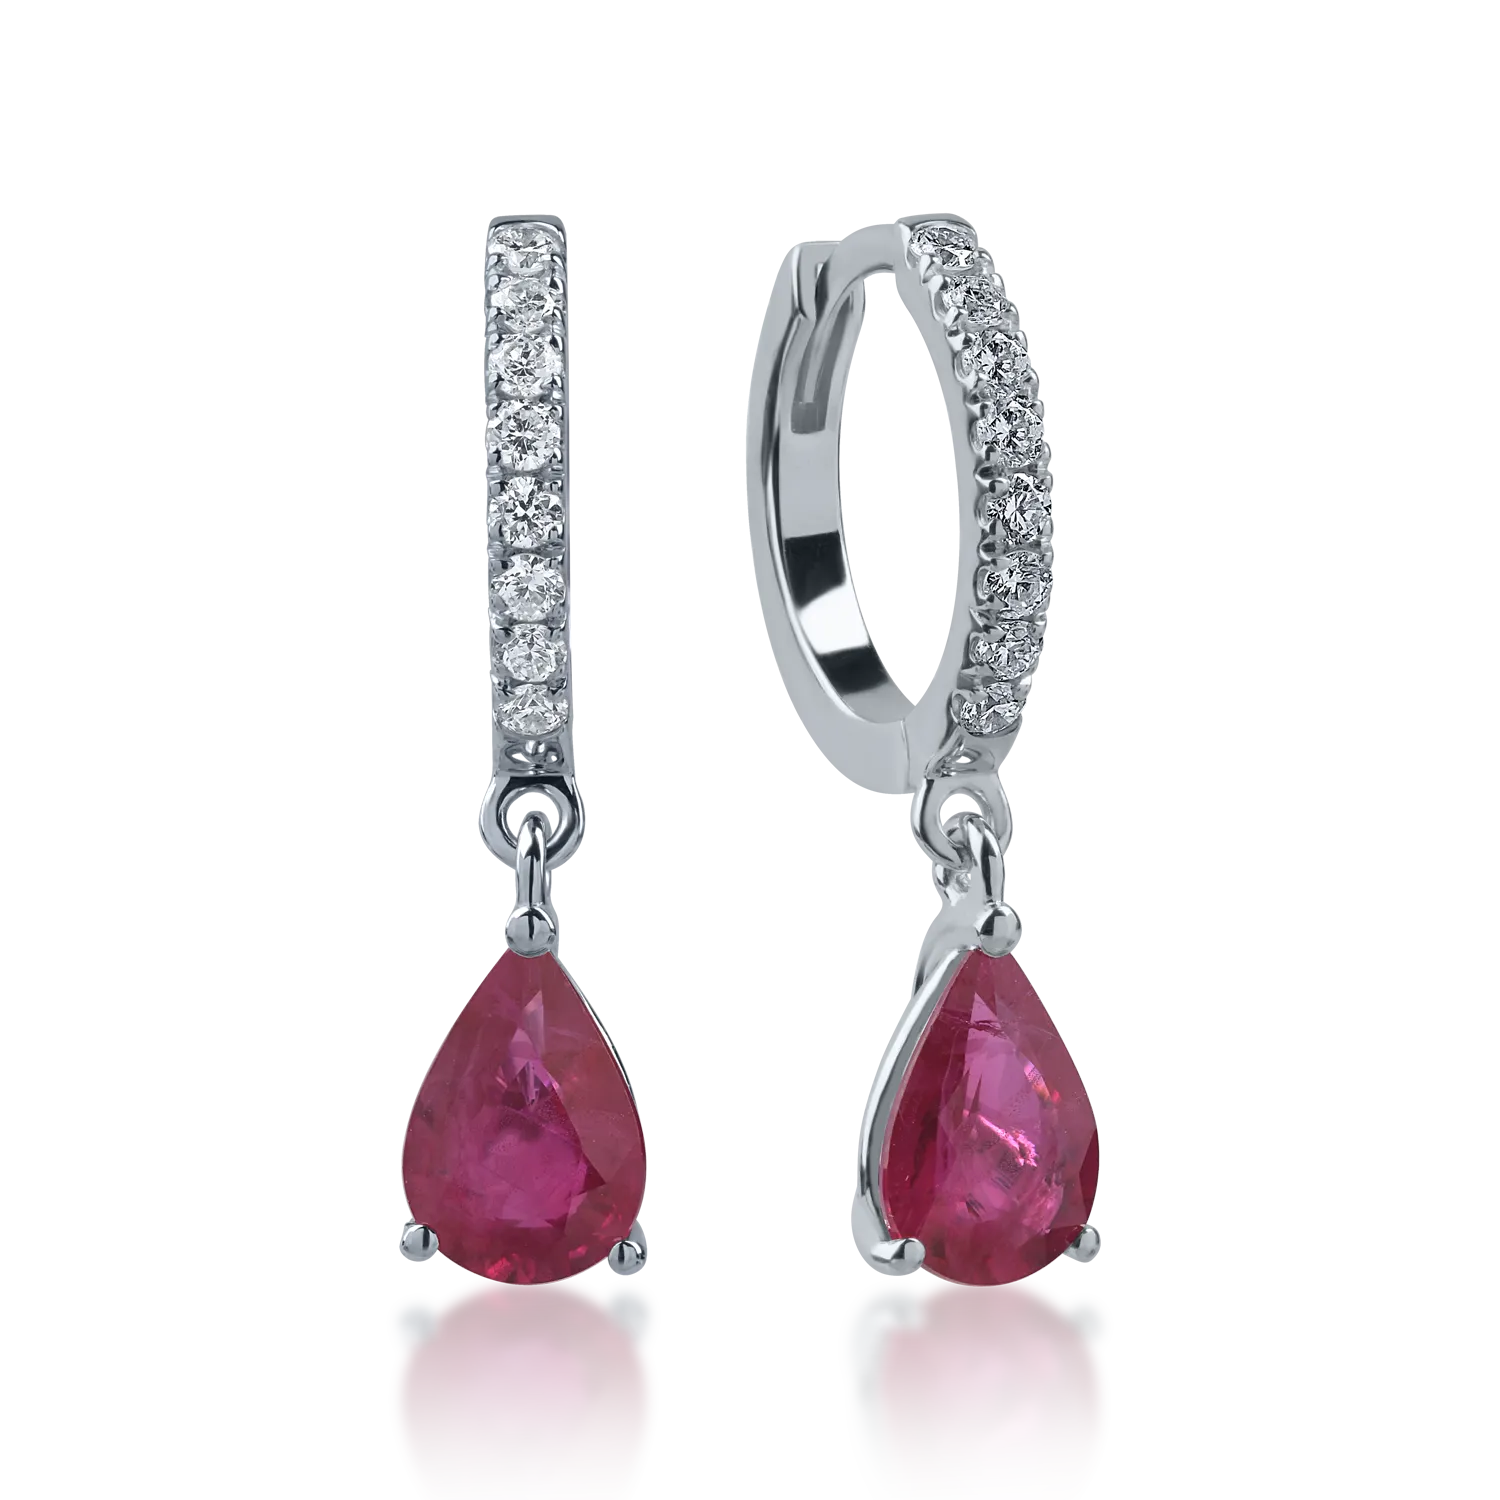 White gold hoop earrings with 0.82ct rubies and 0.1ct diamonds